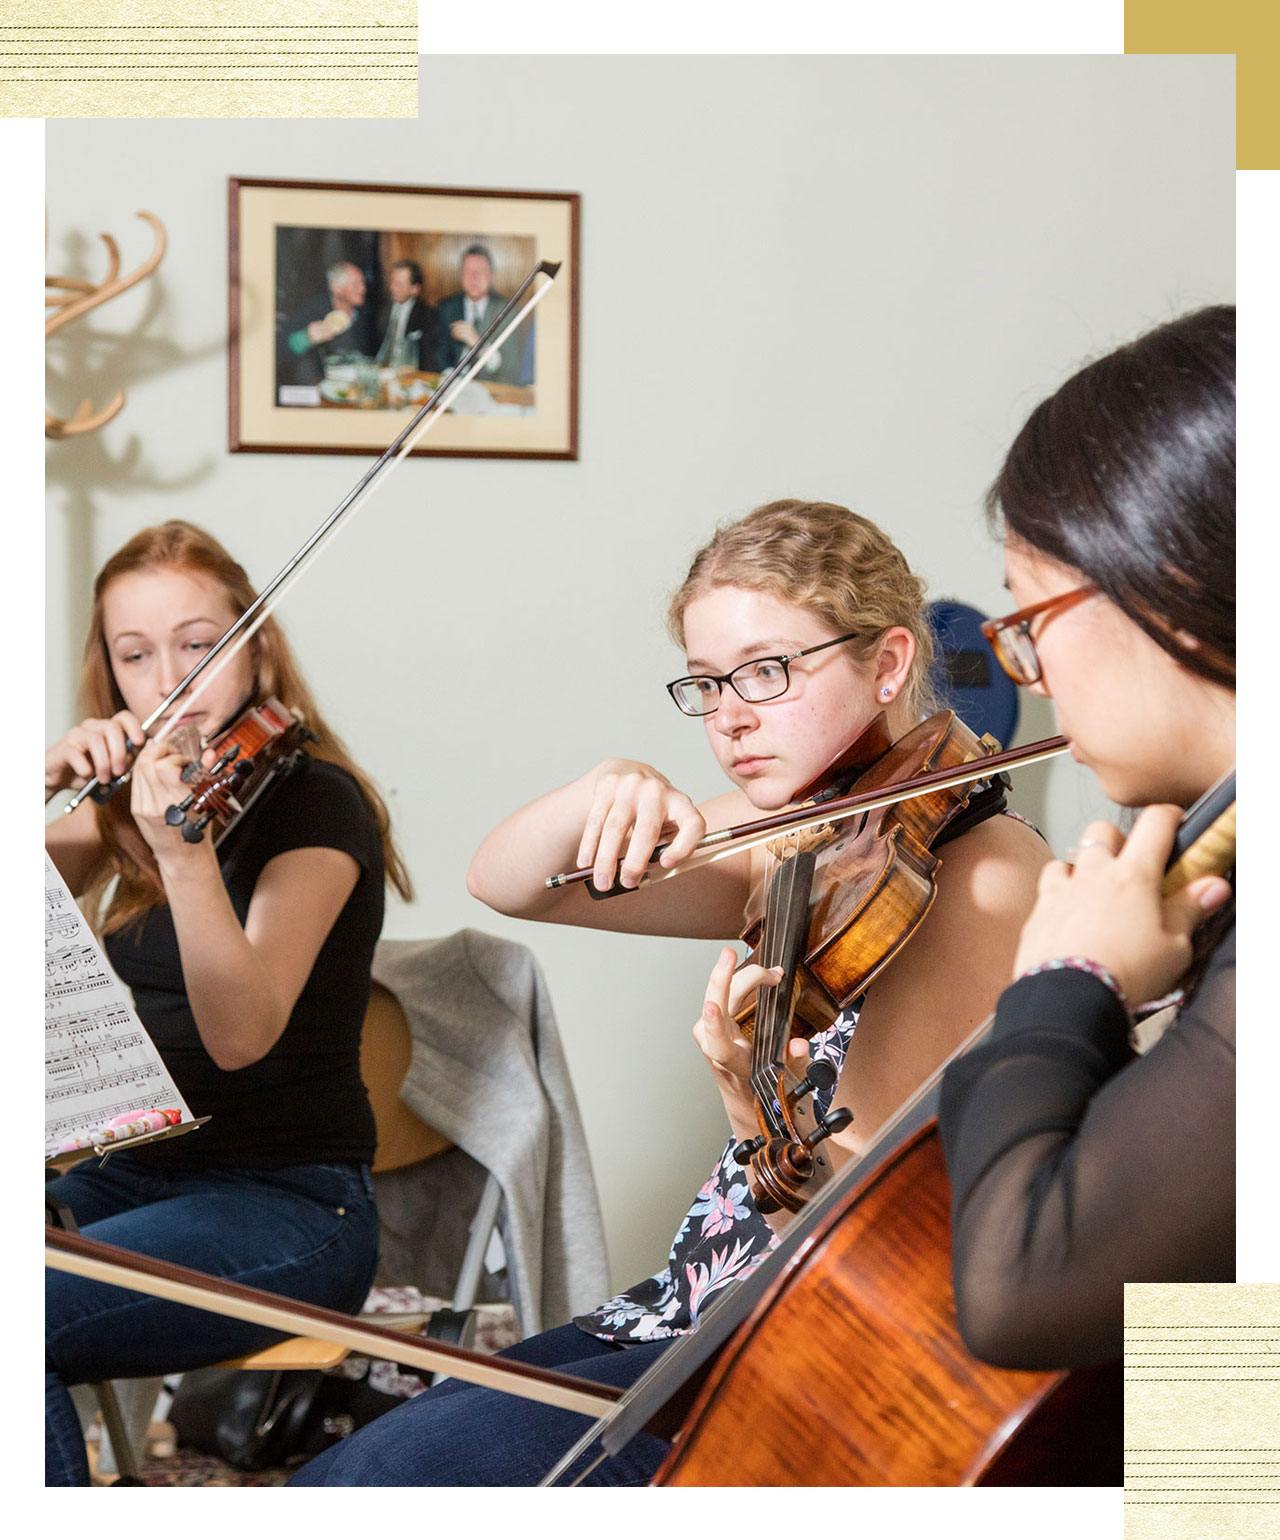 Three students playing instruments. Two playing the violin, while the third plays the cello.